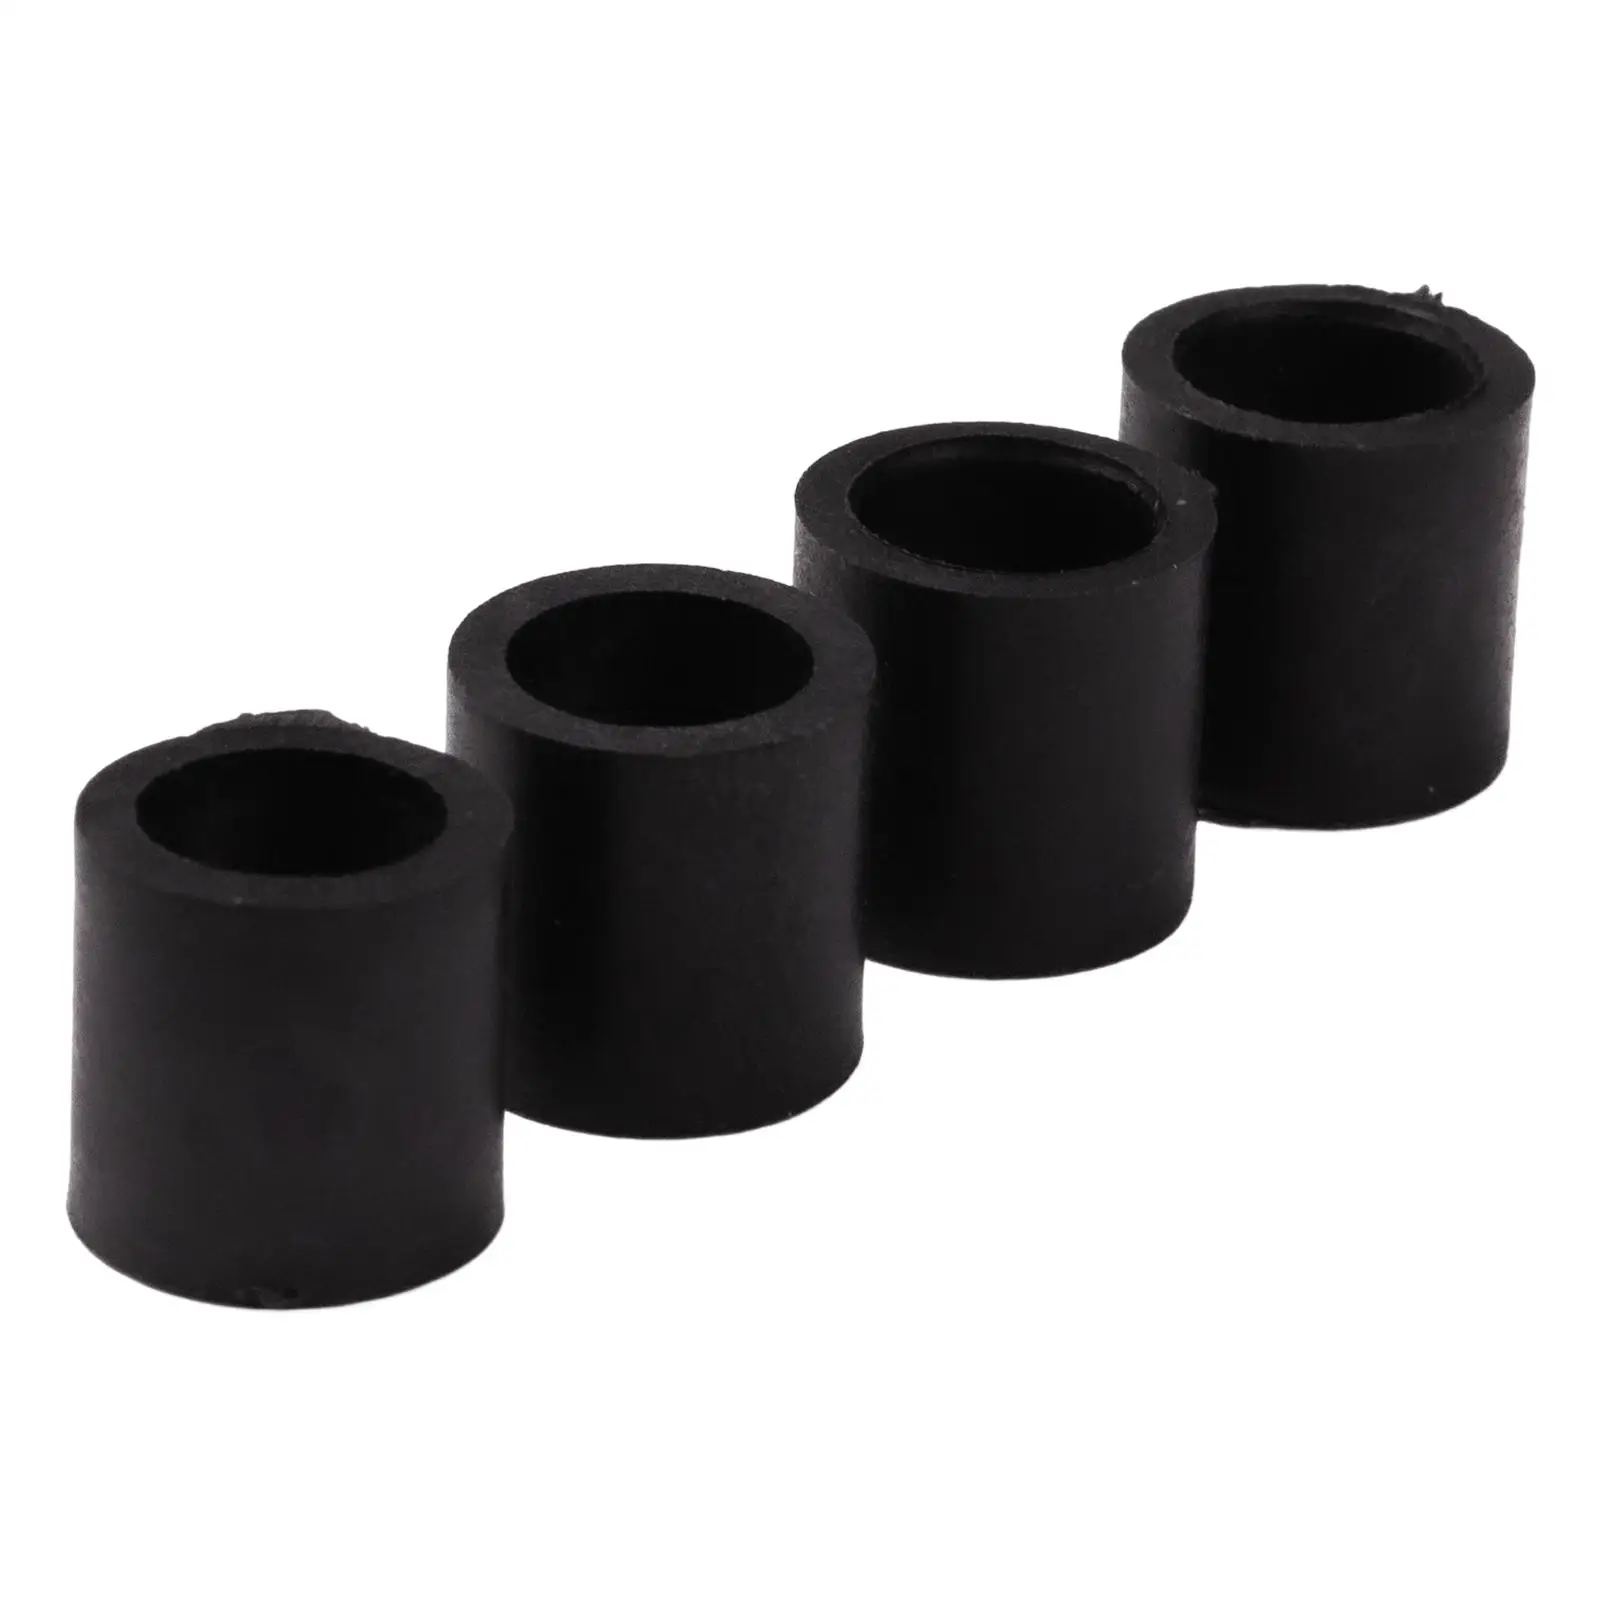 Rubber Rollers Replacement Compatible with Cricut Maker, Mat Guide  Replacement Spare Rubber Roller/Wheel for Cricut Roller Repair - Set of 6 